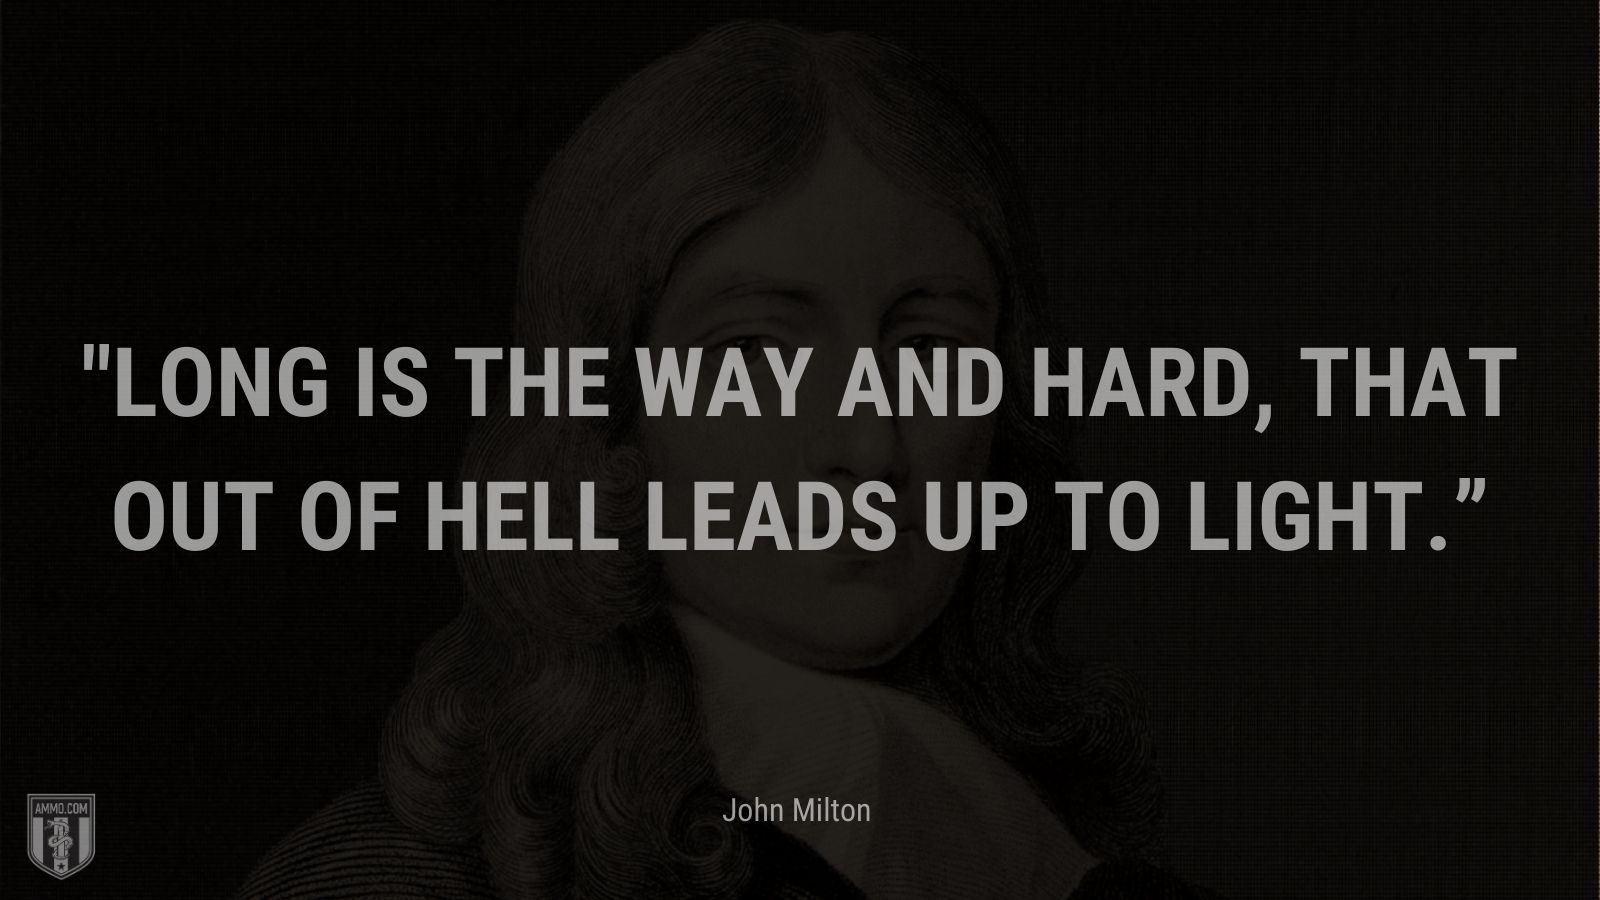 “Long is the way and hard, that out of Hell leads up to light.” - John Milton